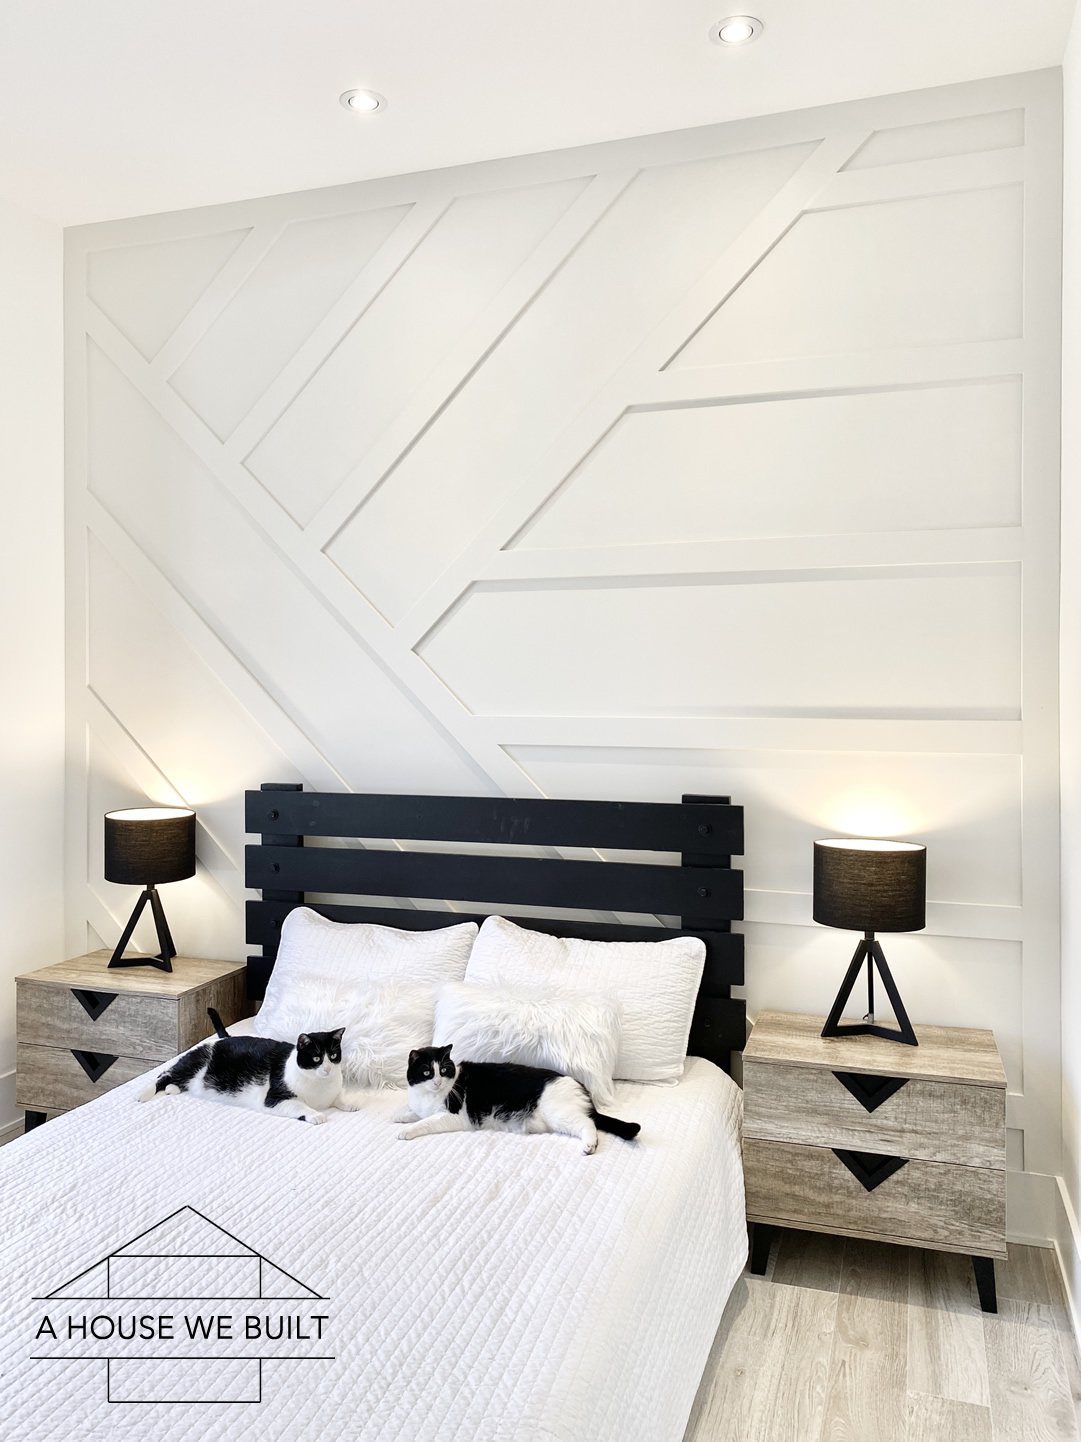 How to Build a Paneled Accent Wall